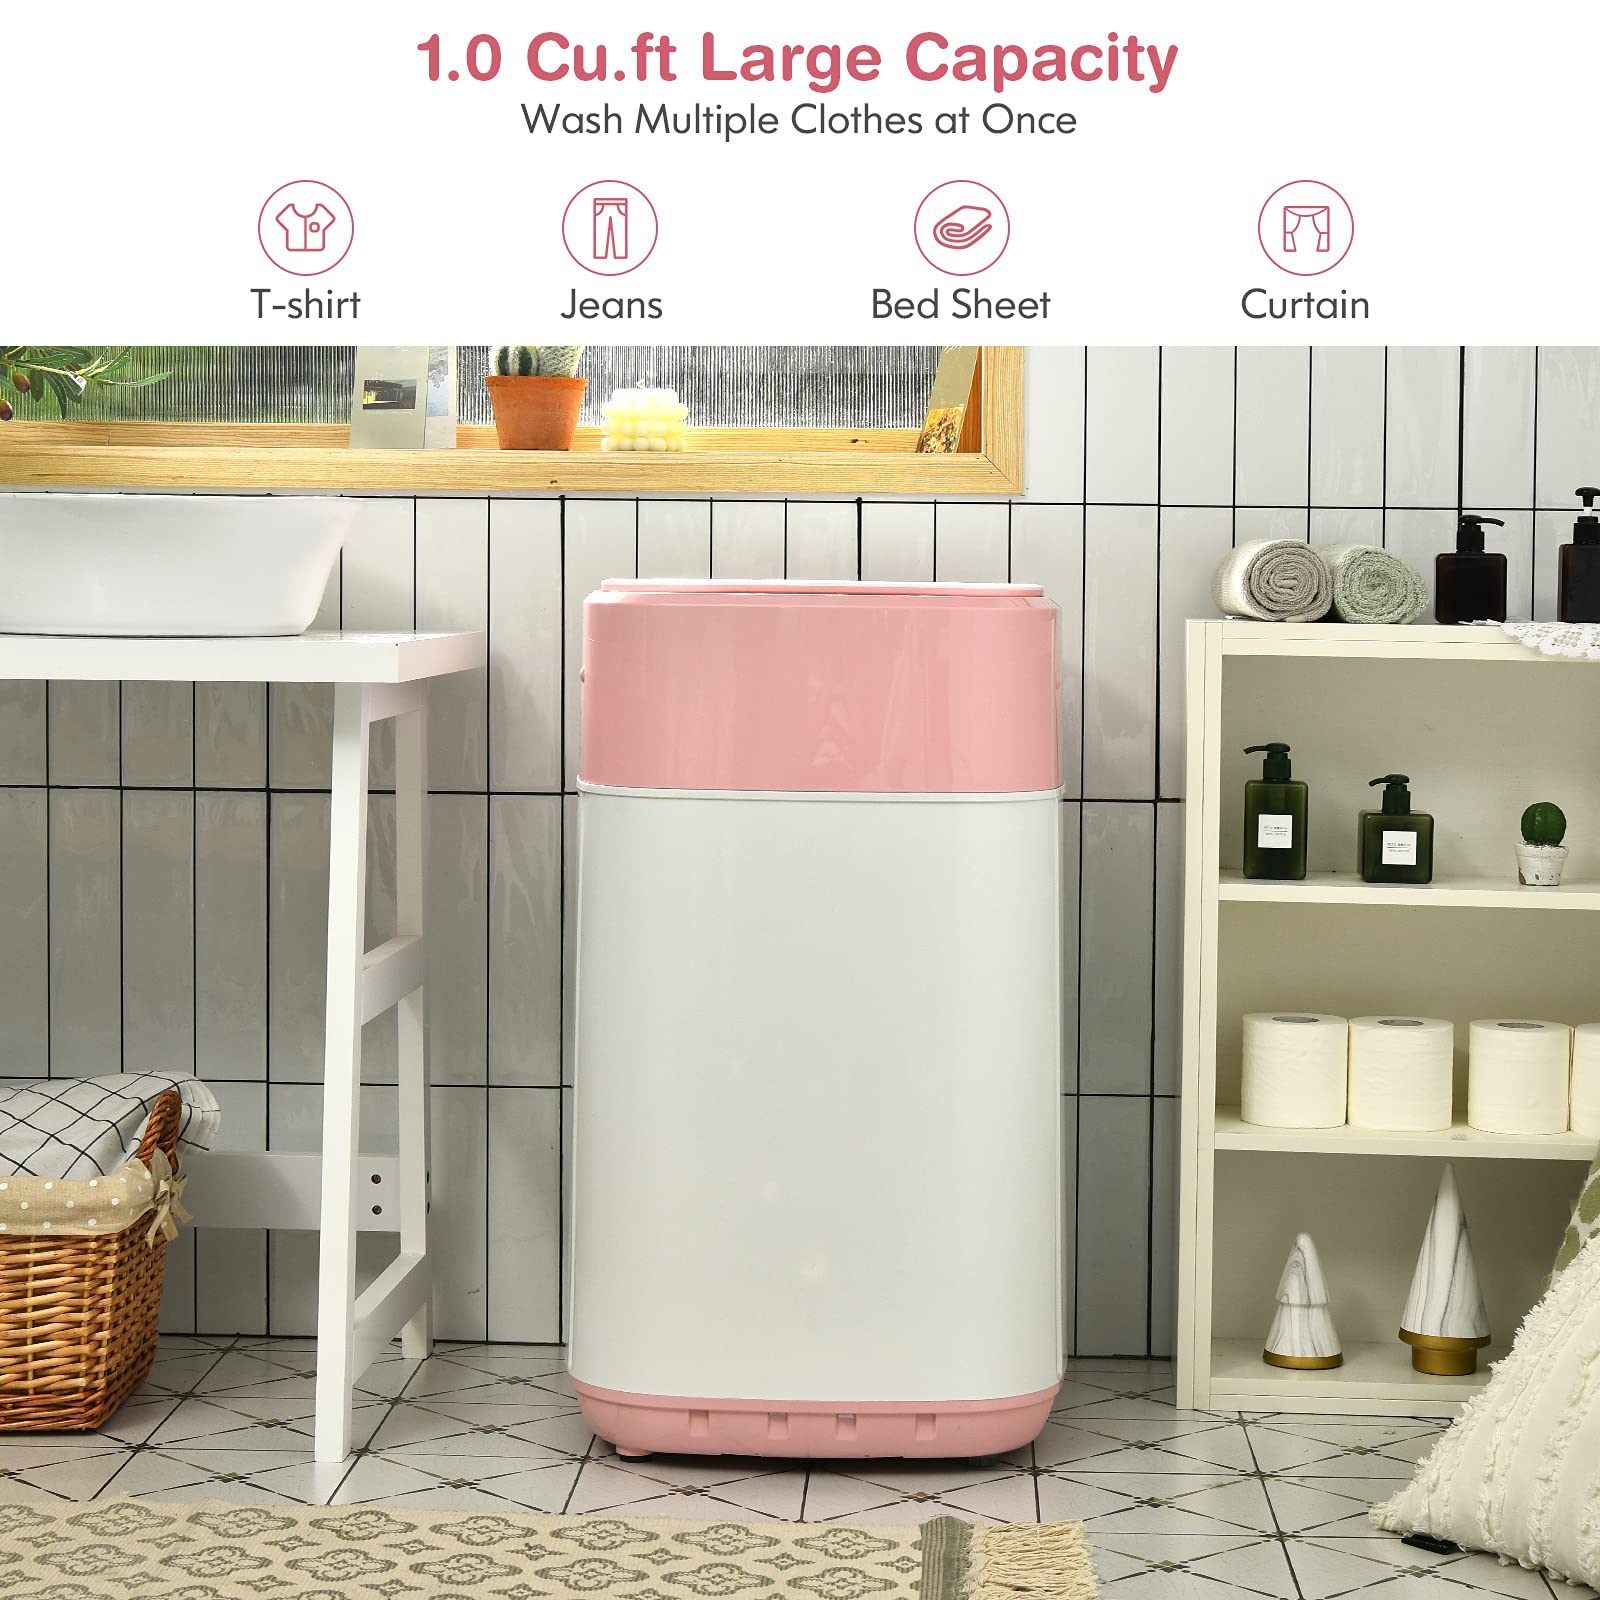 COSTWAY Portable Washing Machine, Built-in Drain Pump, 8Lbs Capacity, Full-Automatic washer with 6 Programs, Child Lock, Compact Laundry Washer for RV, Dorm, Apartment, Pink